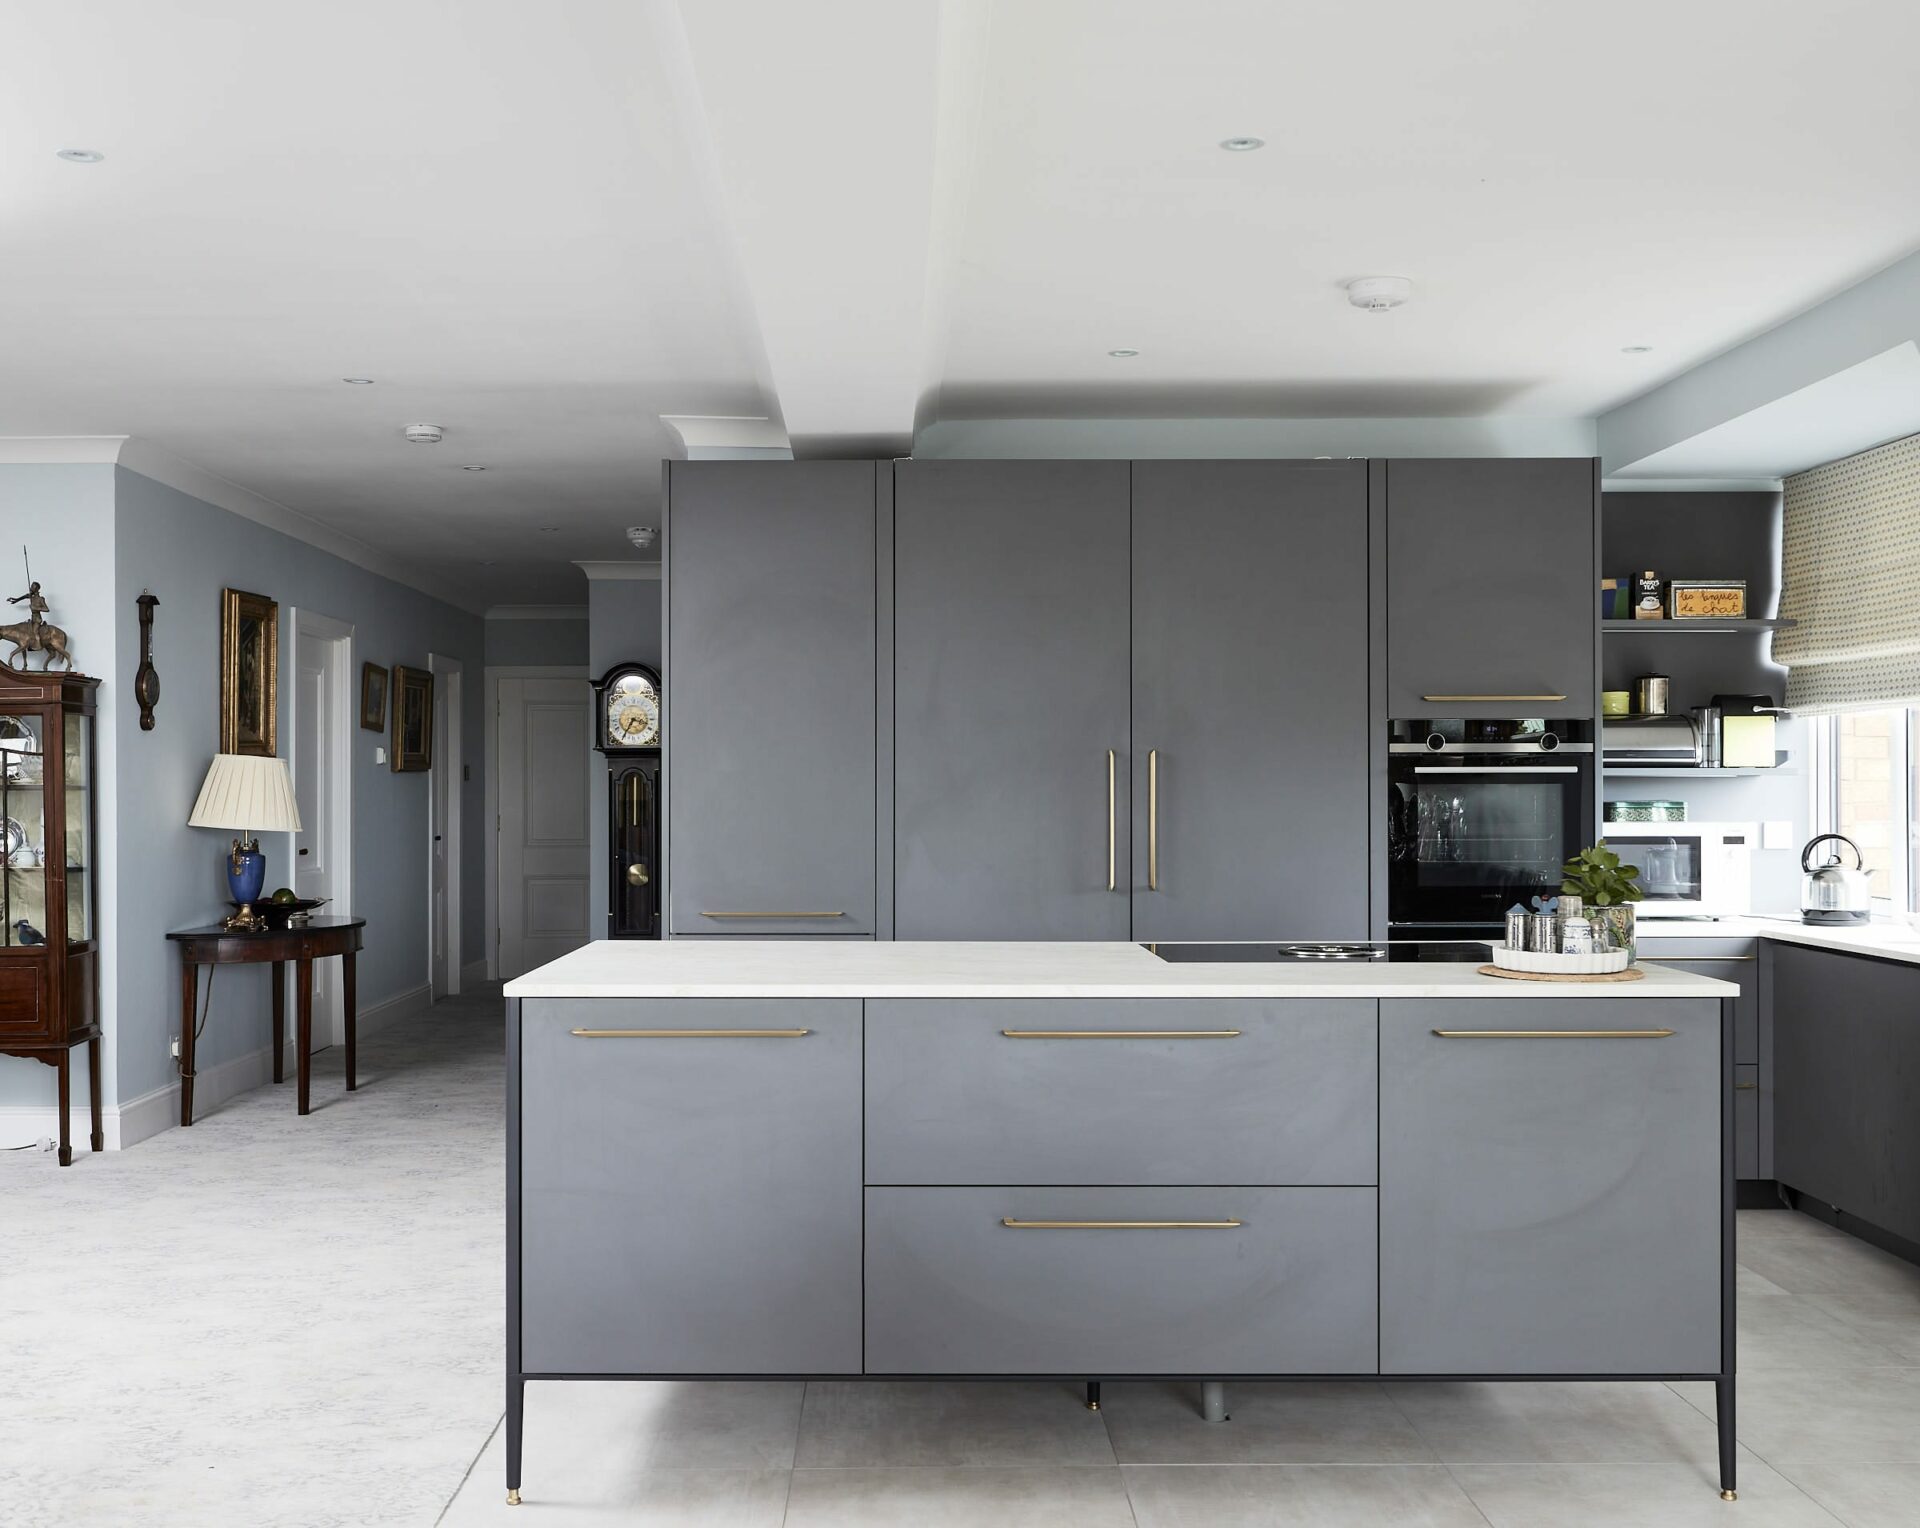 Interior design Dublin. The kitchen had to be installed in the centre of the living space to the kitchen was designed So that the entire working kitchen could be closed off when not in use.